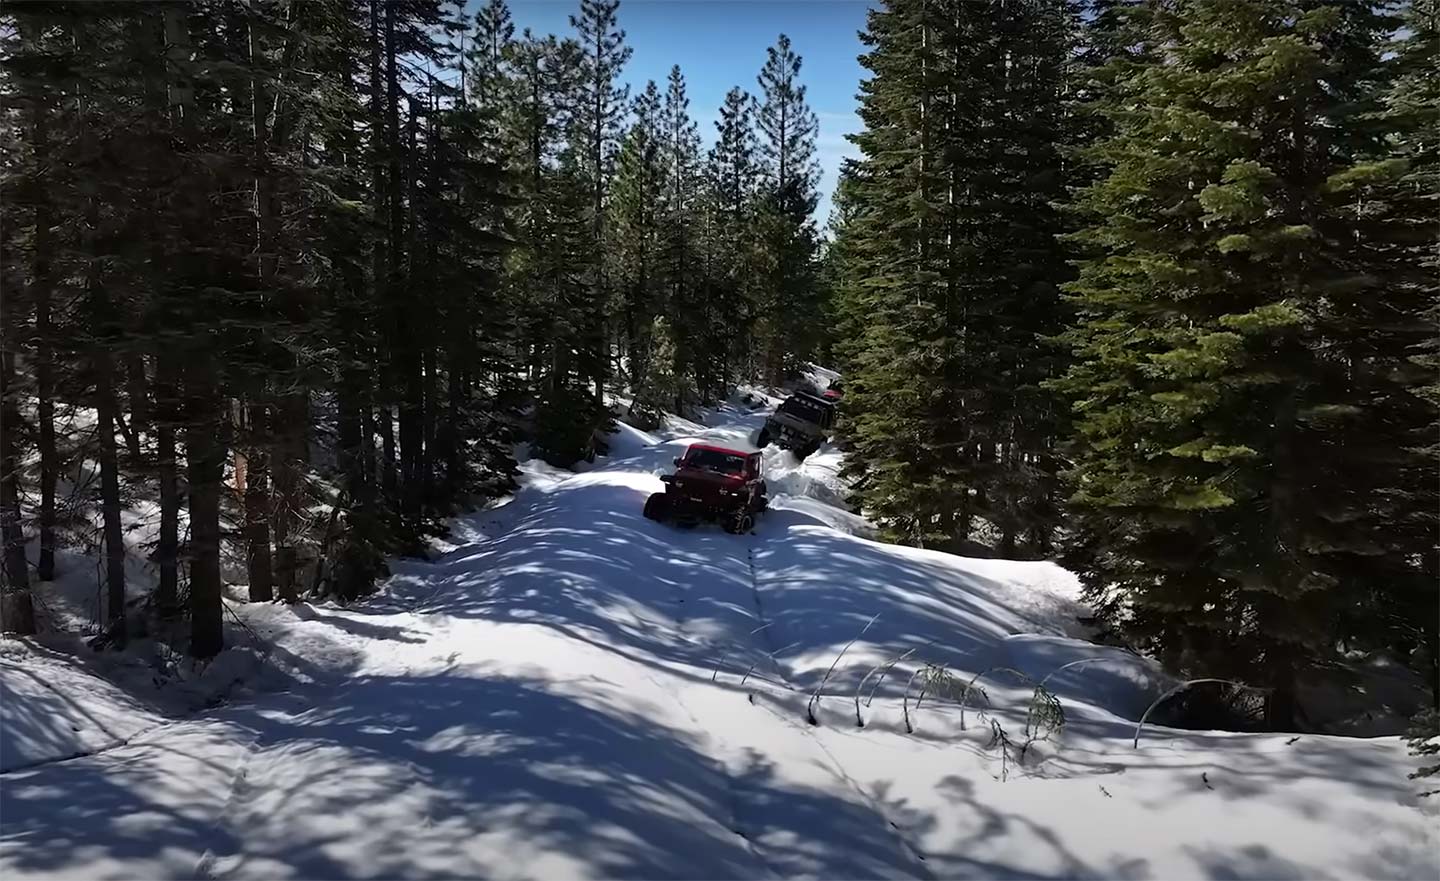 When you get to the point where no one else has gone before, you have to plow the trails yourself. That means hours of slow wheeling through loose powder just to make something that resembles a track.